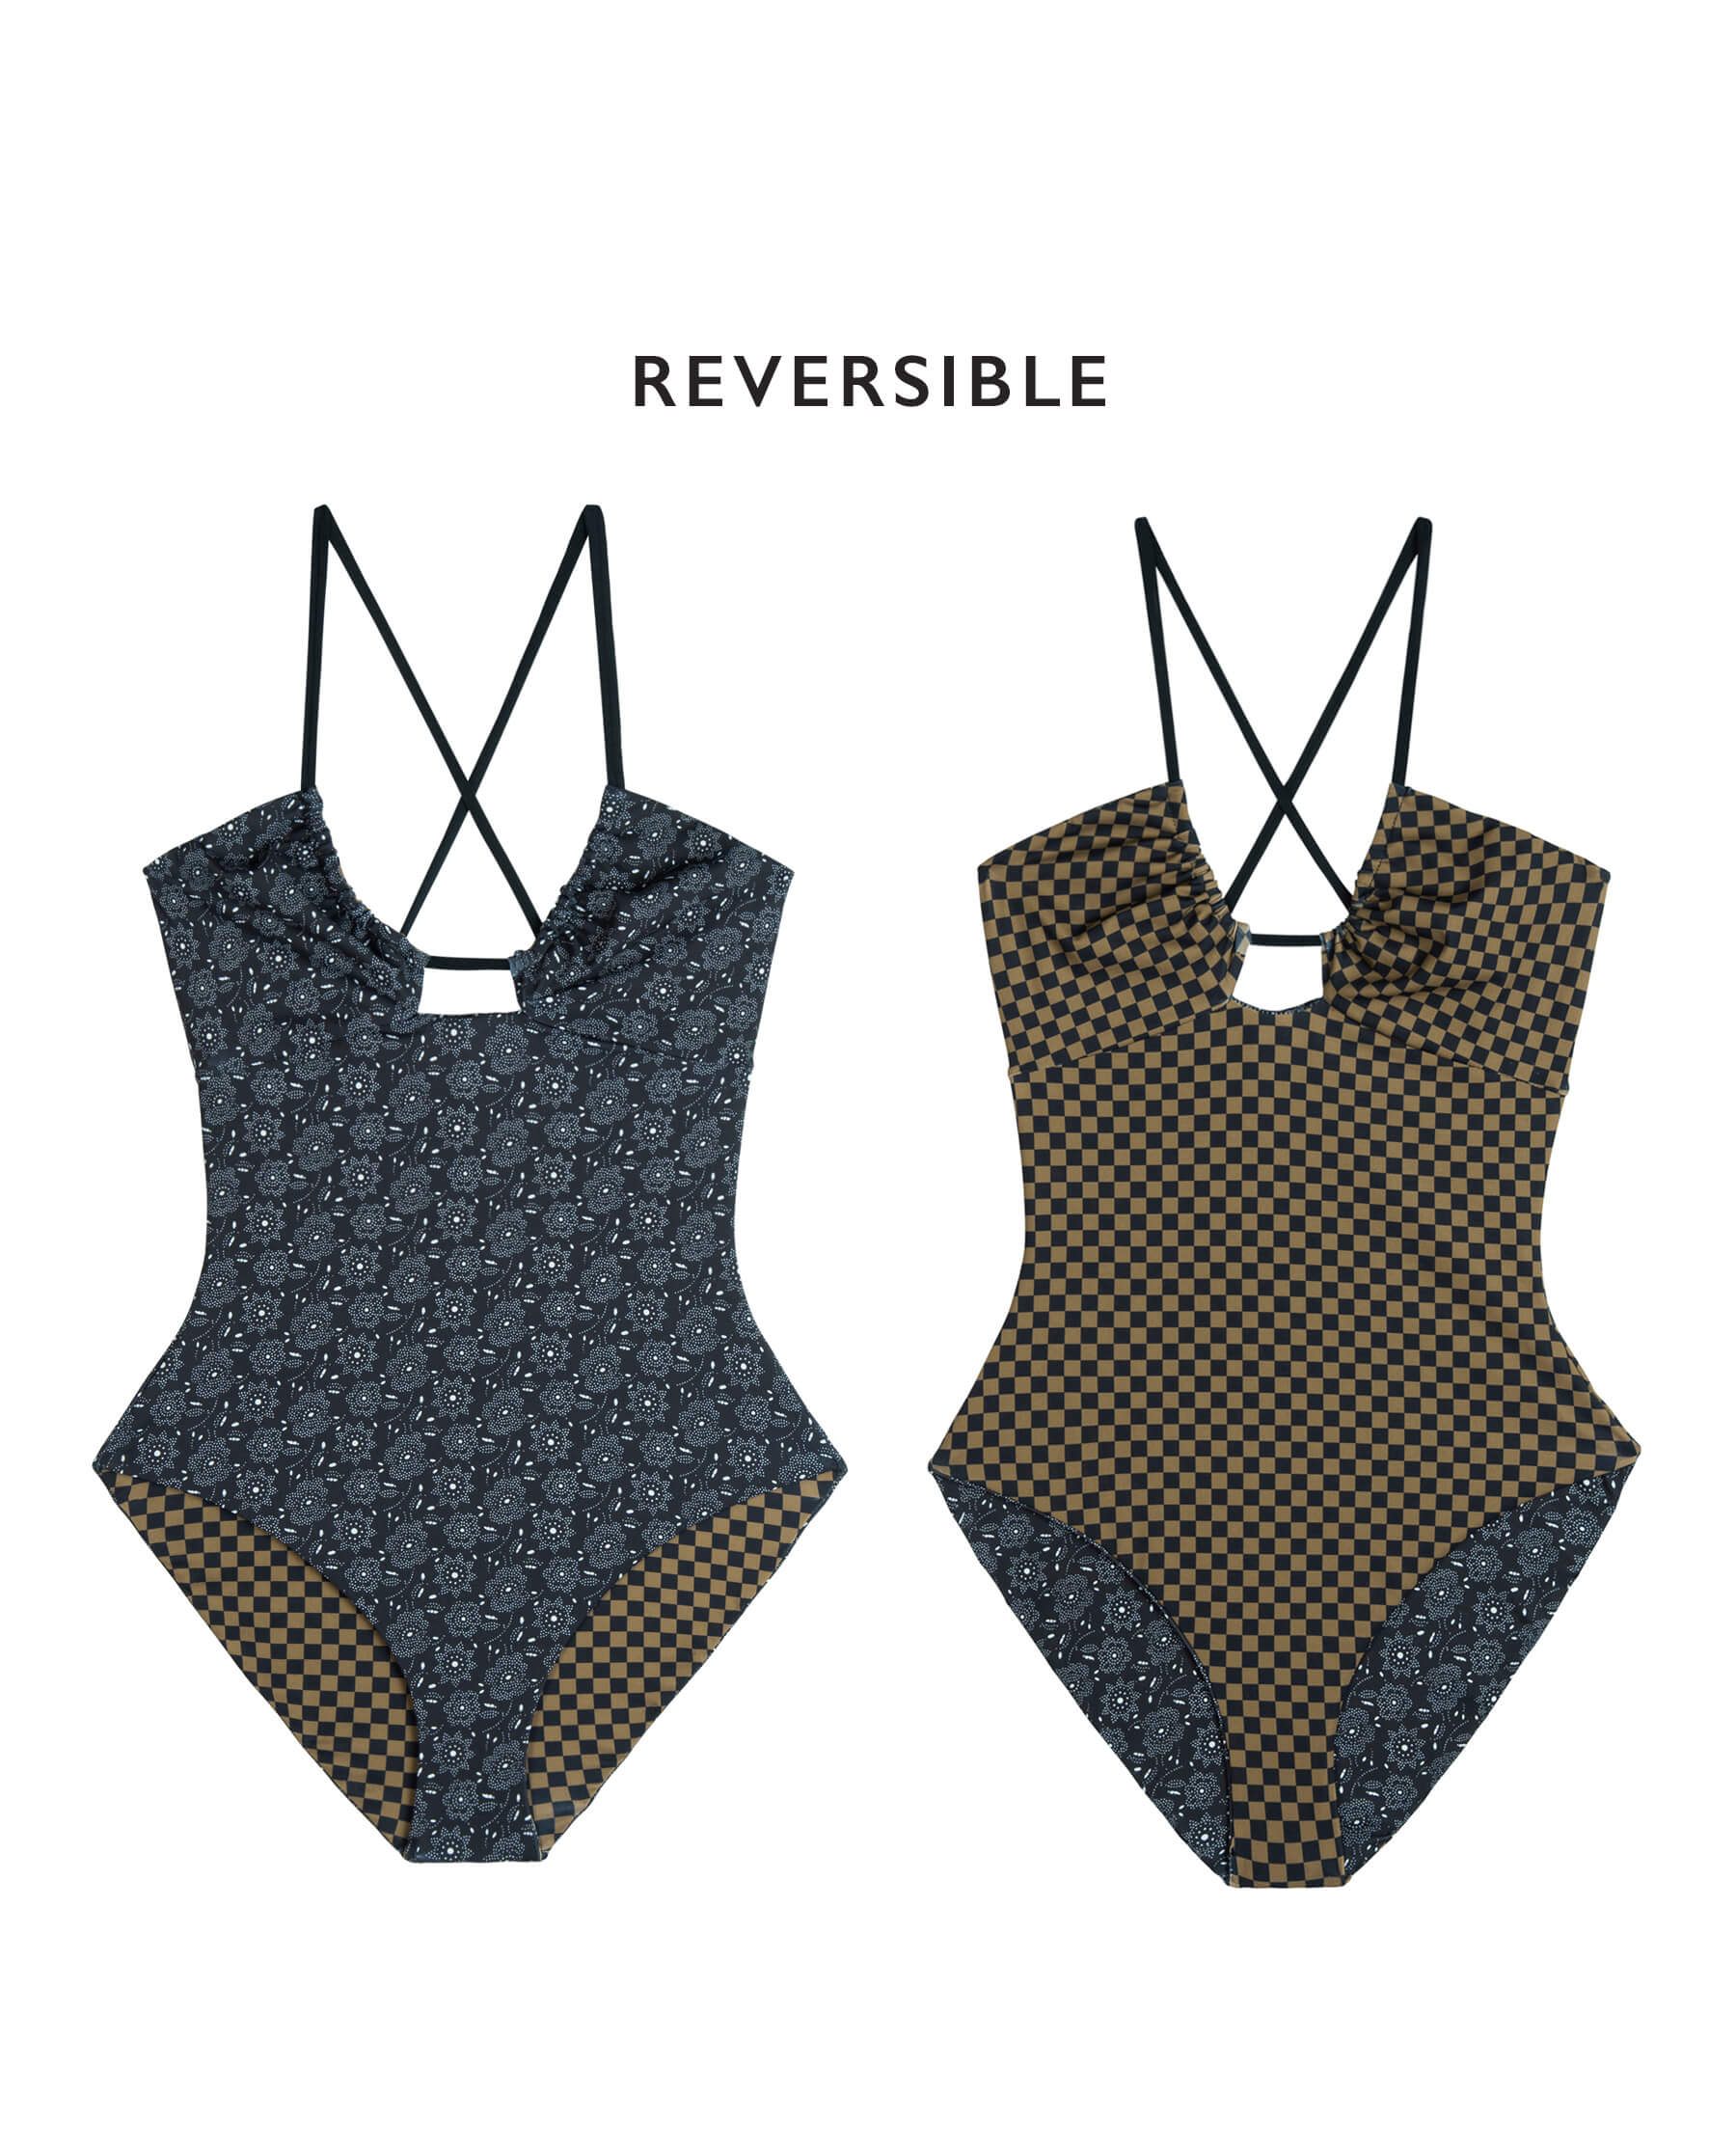 The Reversible Keyhole One Piece. -- Black Bandana Daisy and Bronze Check SWIM ONE PIECES THE GREAT. SP24 SWIM